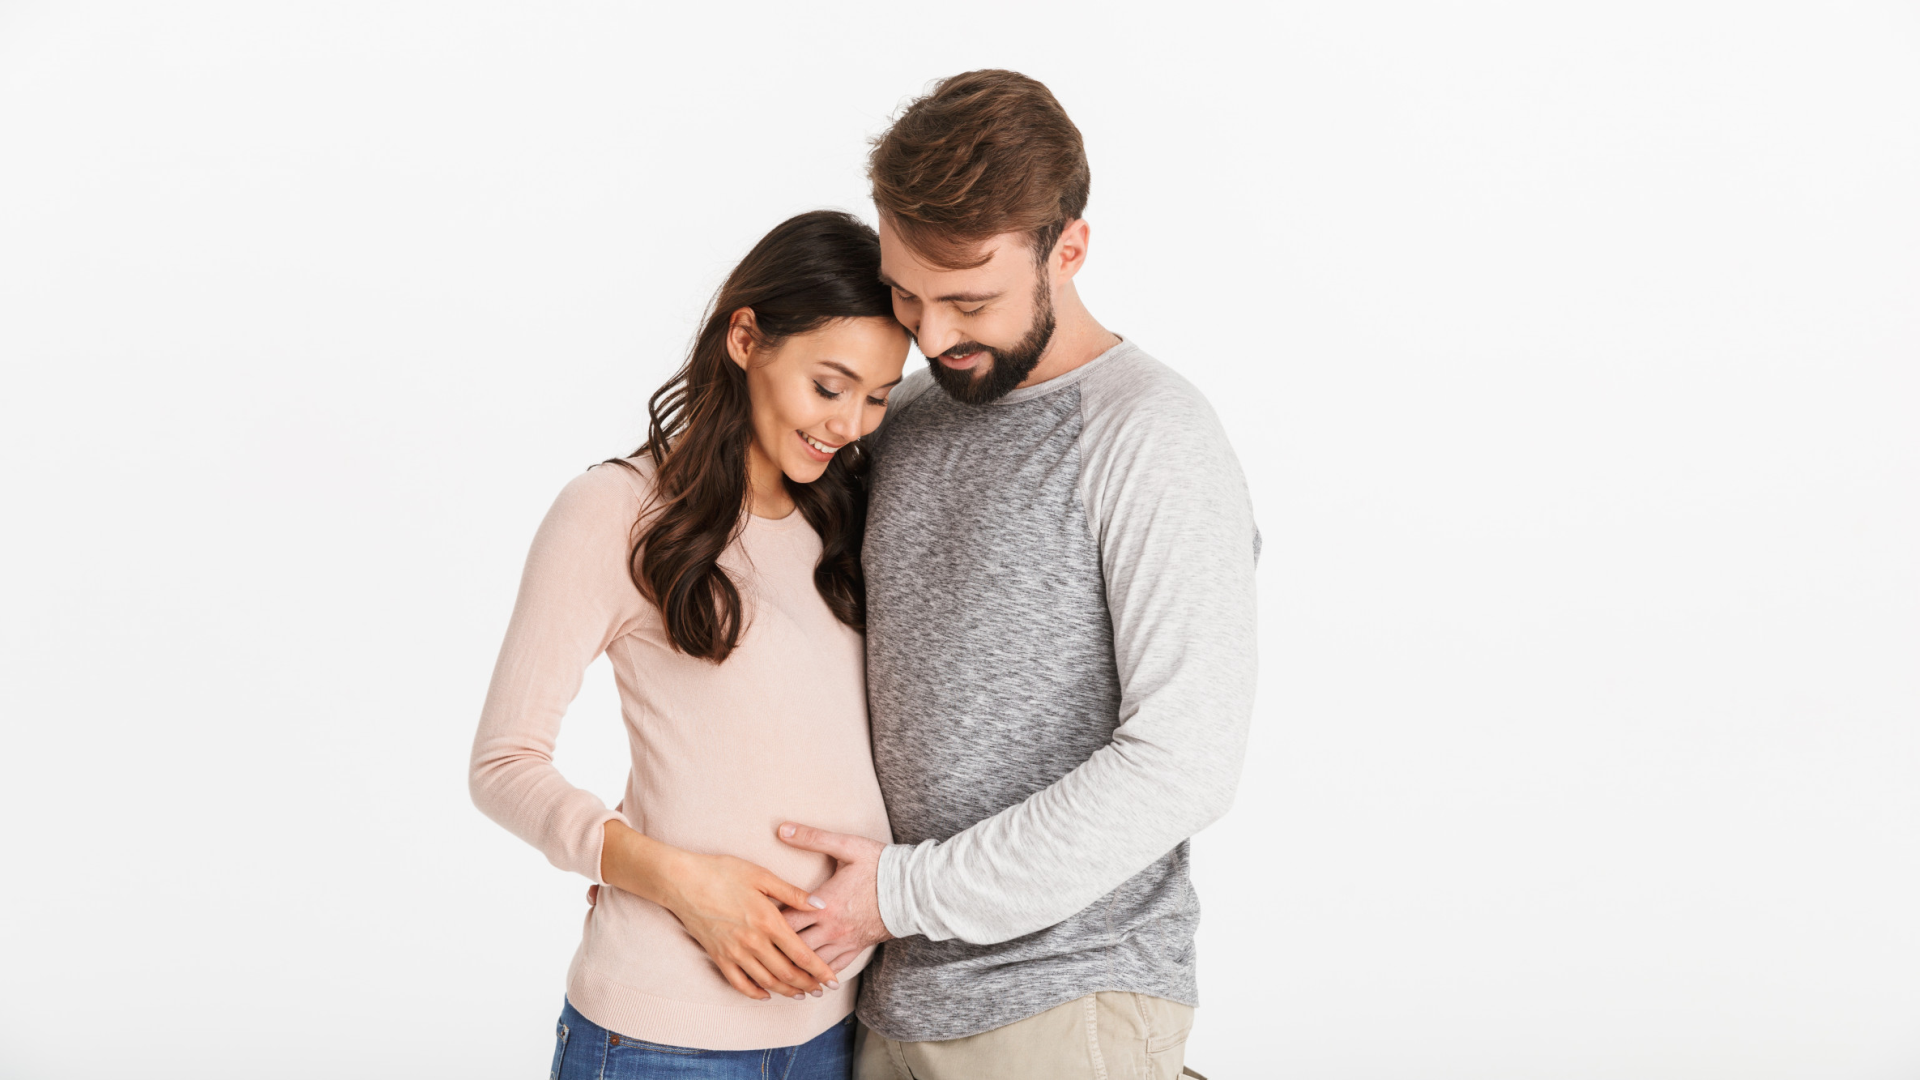 What is Non-Invasive Prenatal Testing? Here’s What Couples Should Know